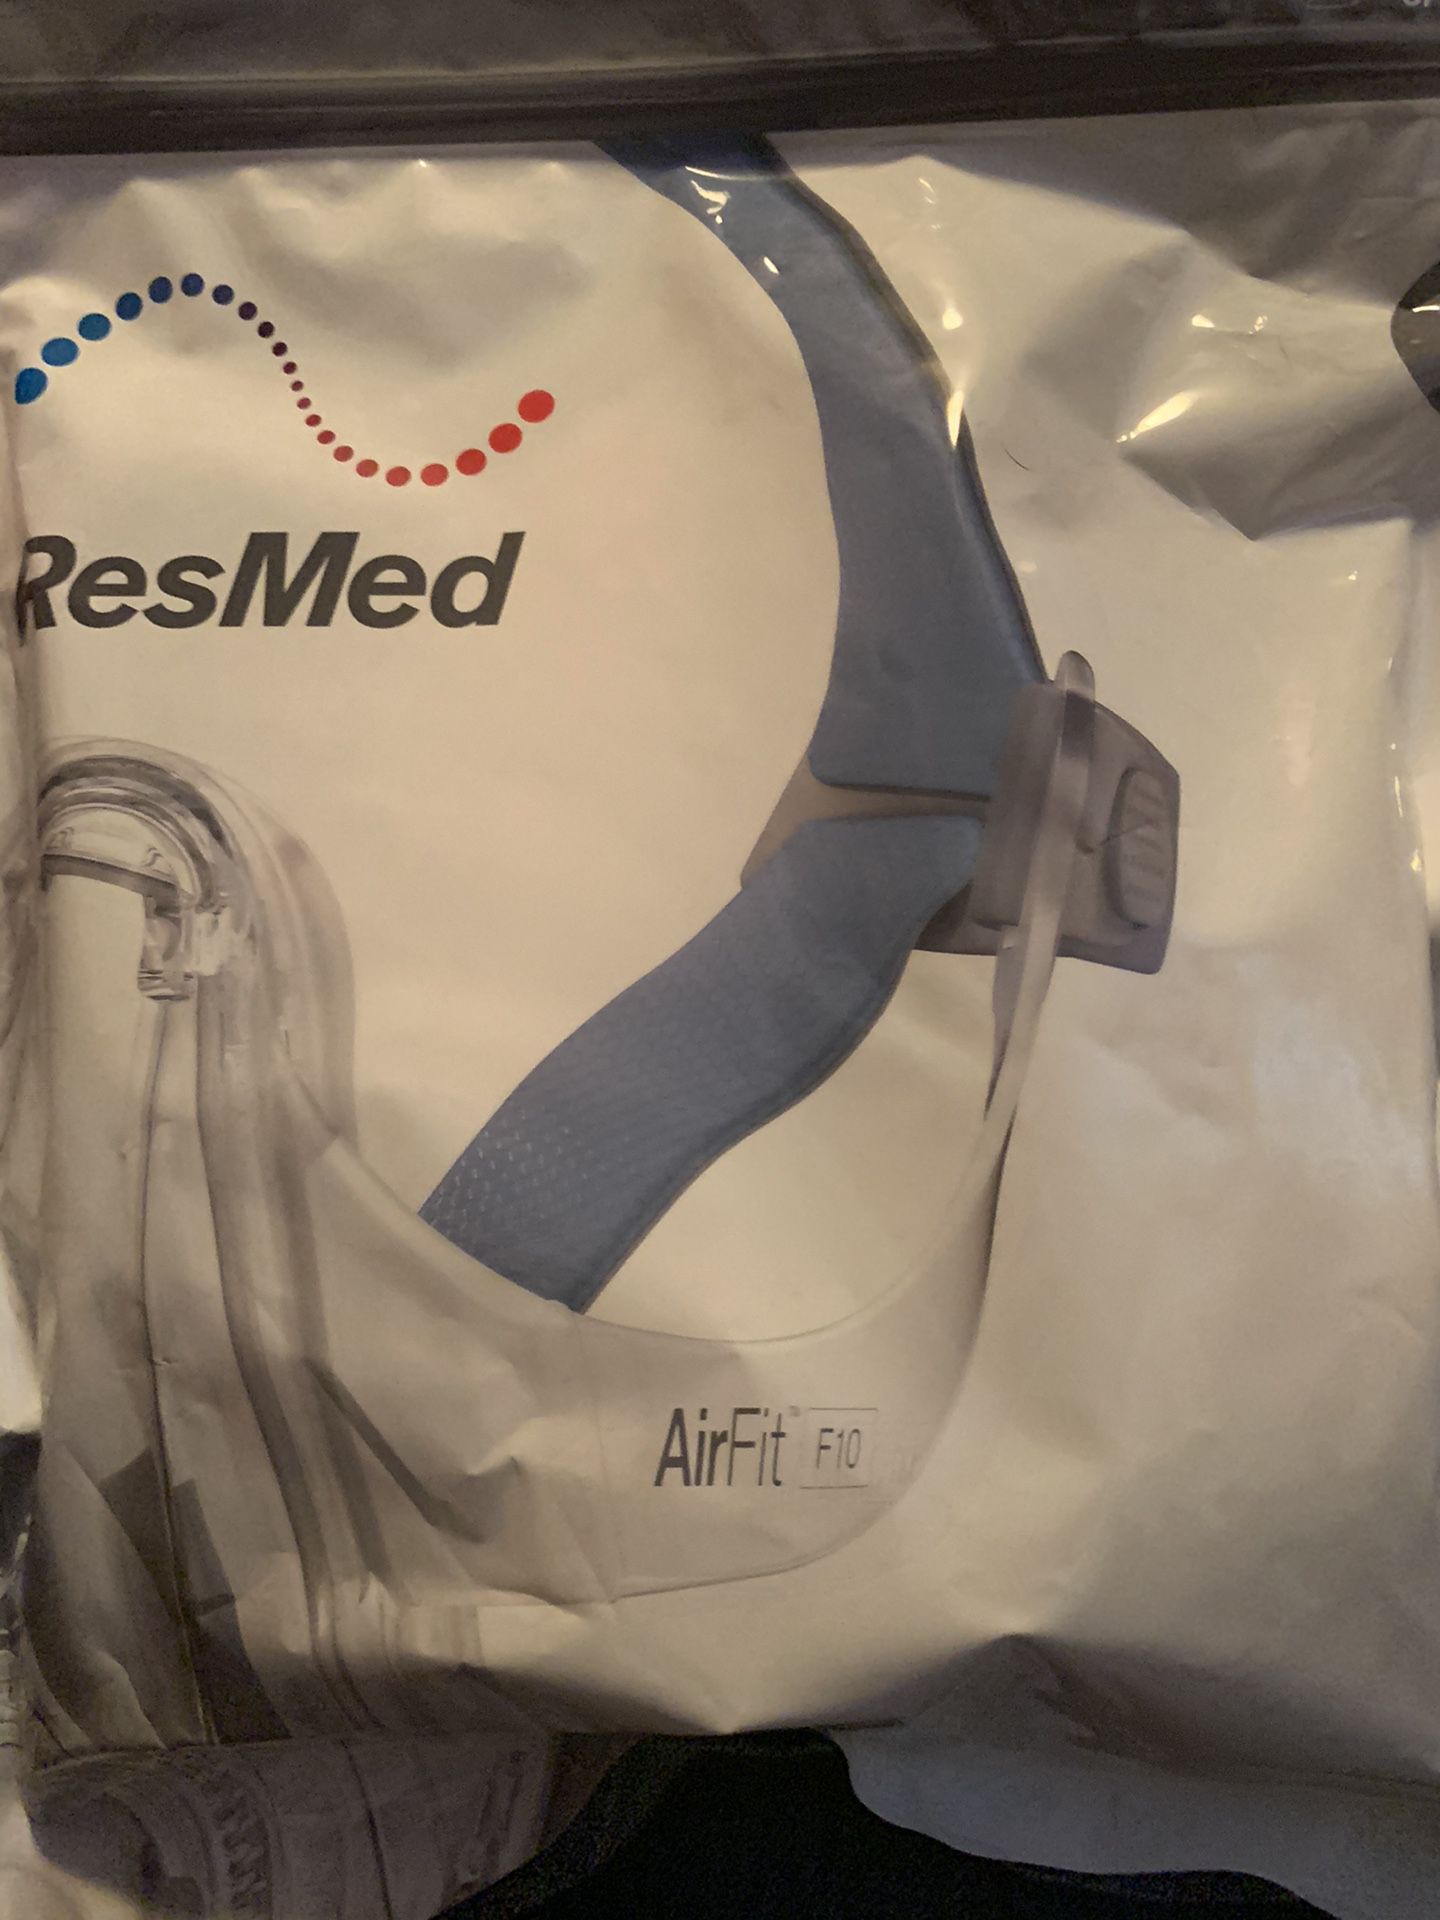 AirFit F10 full face mask for ResMed cpap large still sealed